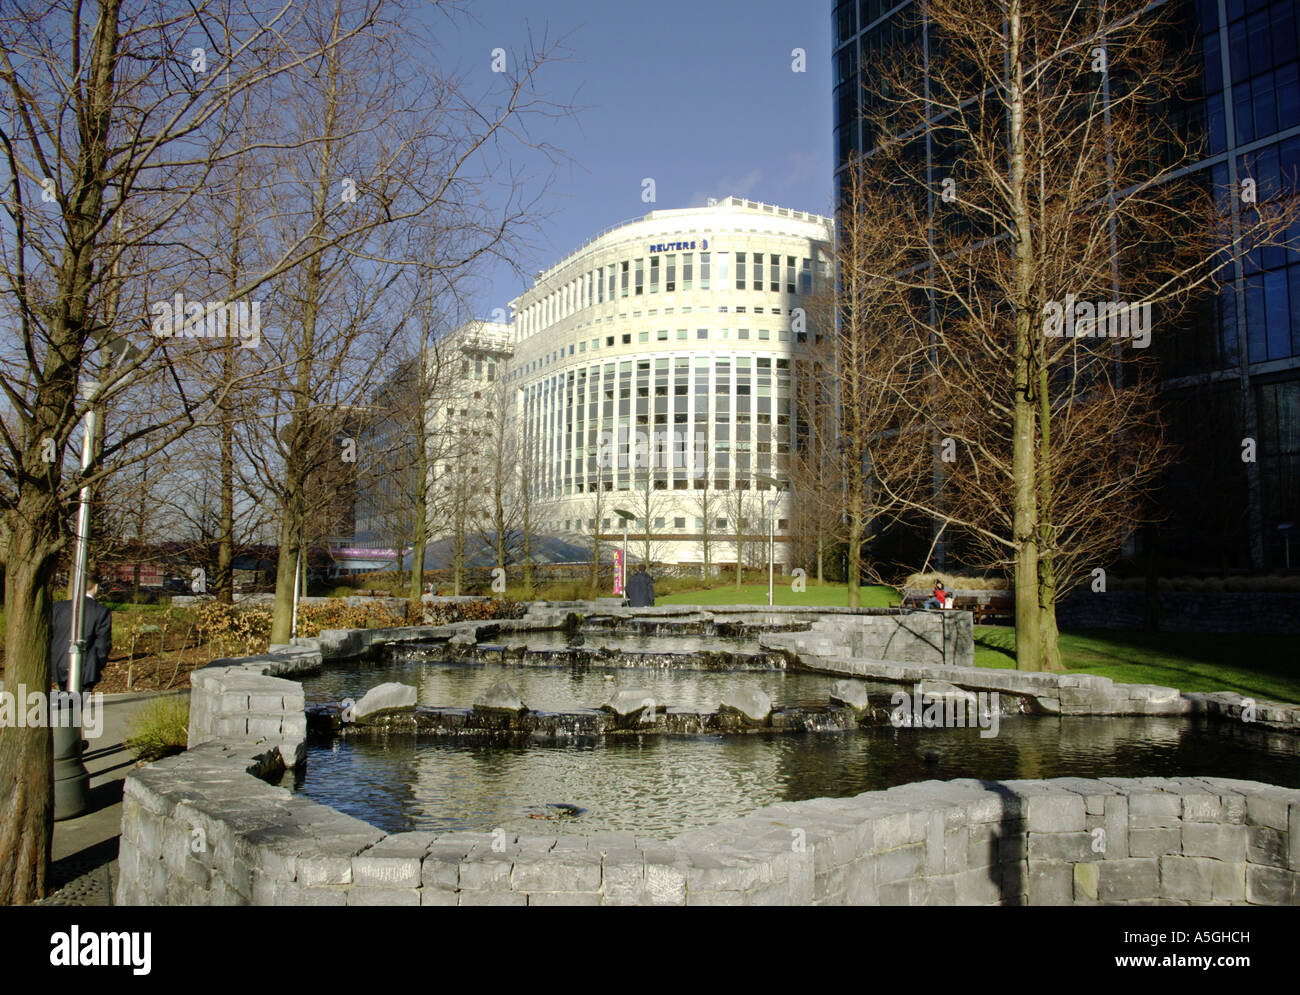 Canary Wharf London 30 The South Colonnade Reuters and peaceful water feature Stock Photo